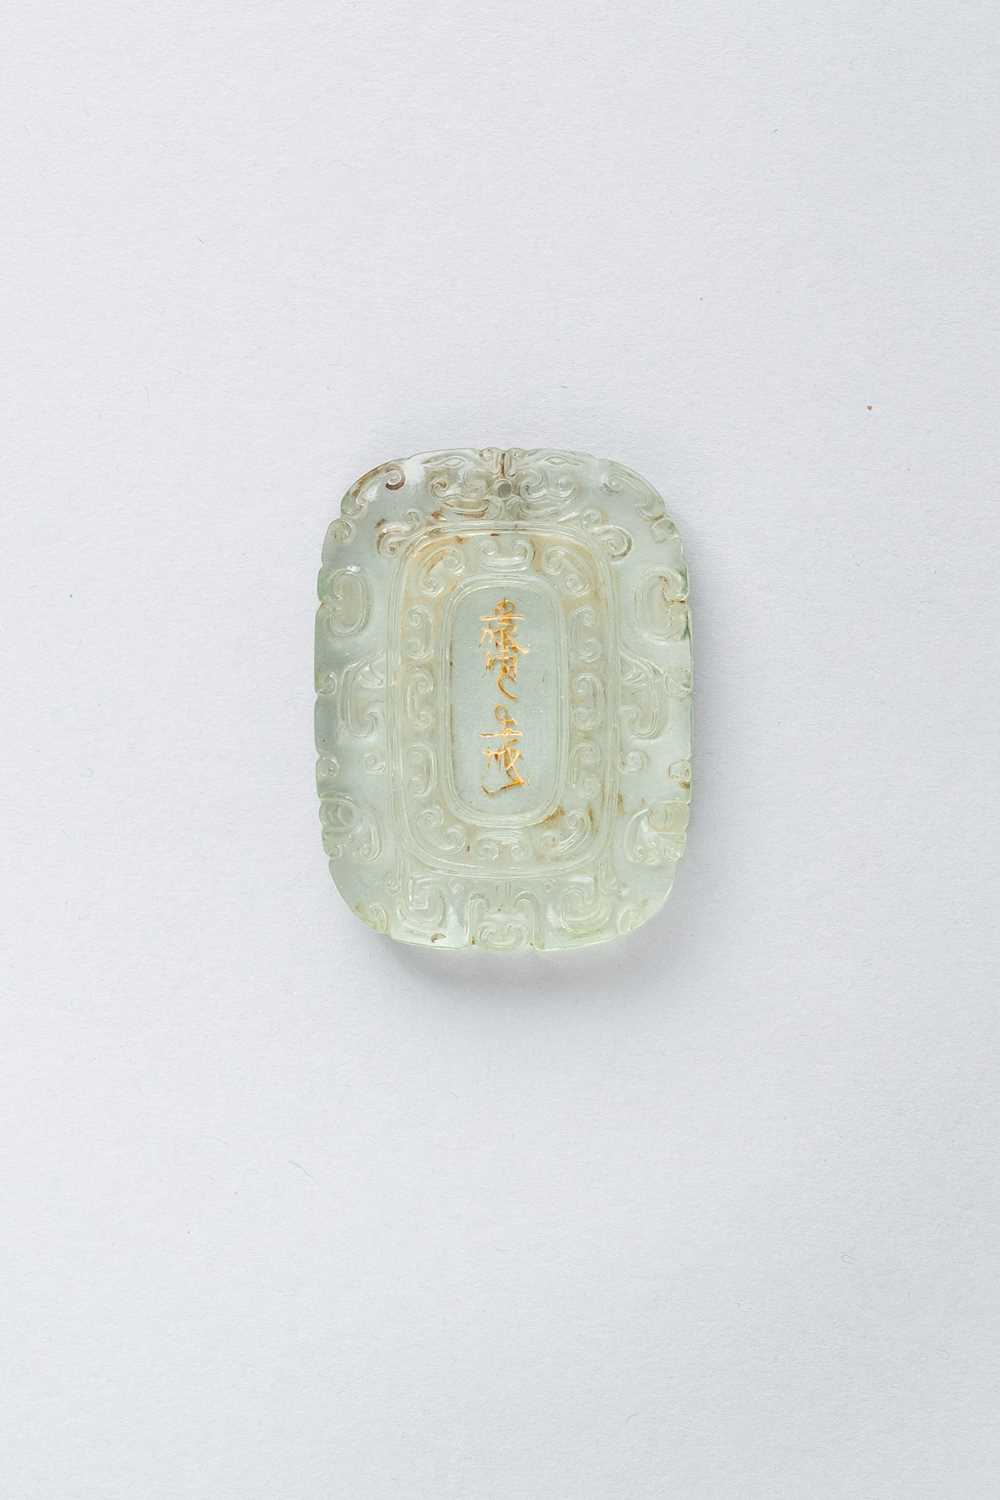 A CHINESE GLASS ABSTINENCE PLAQUE QING DYNASTY OR LATER The pale lime green pendant decorated with